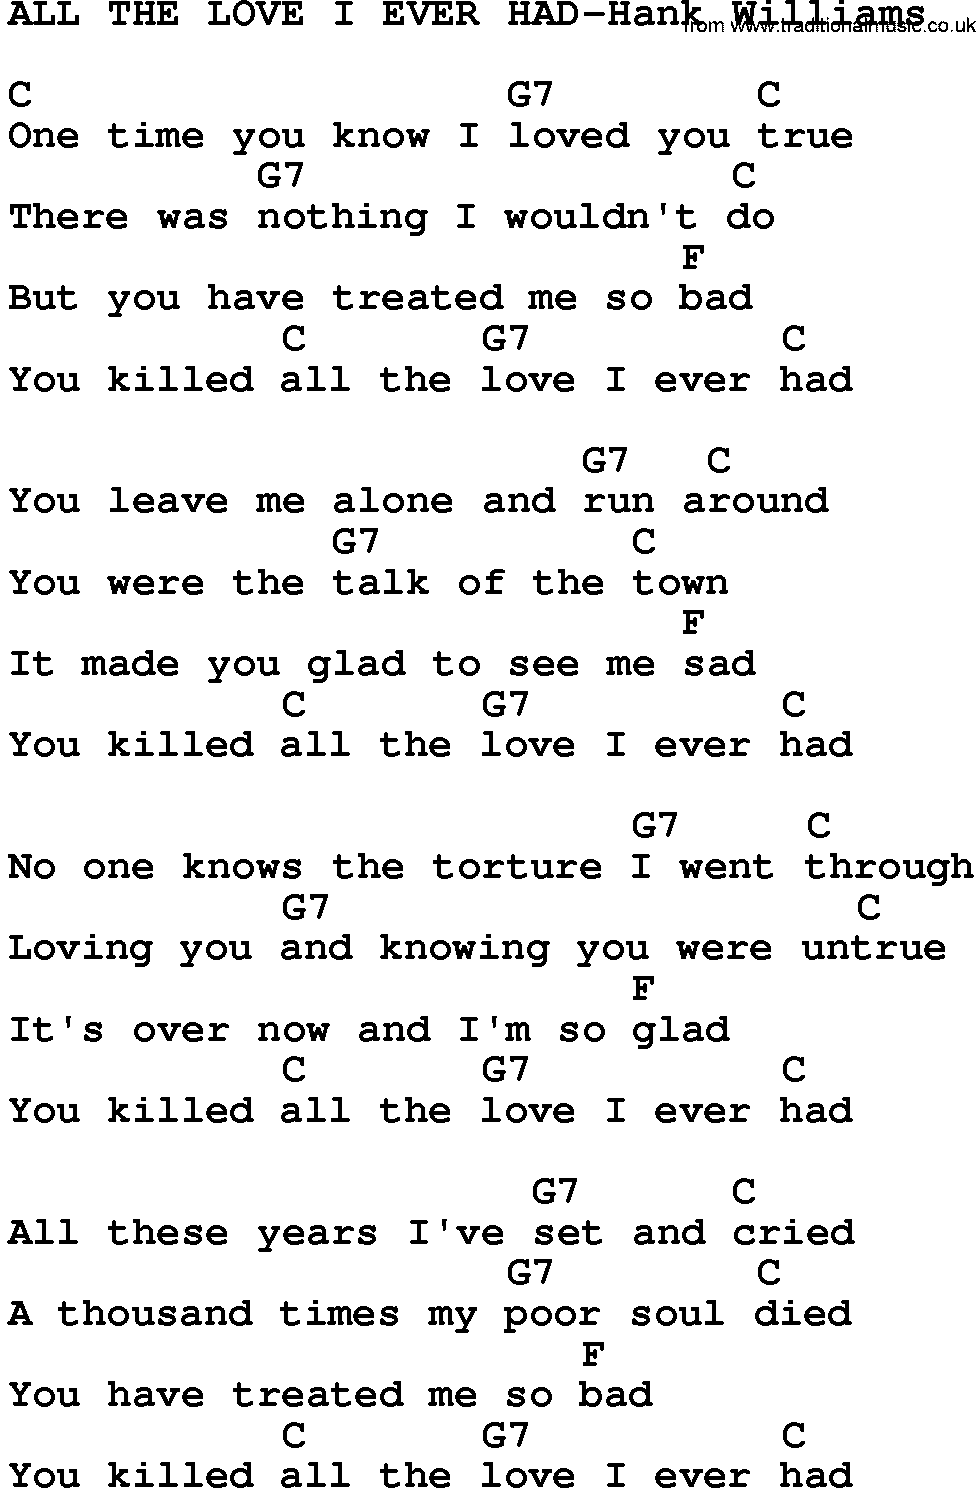 Country music song: All The Love I Ever Had-Hank Williams lyrics and chords